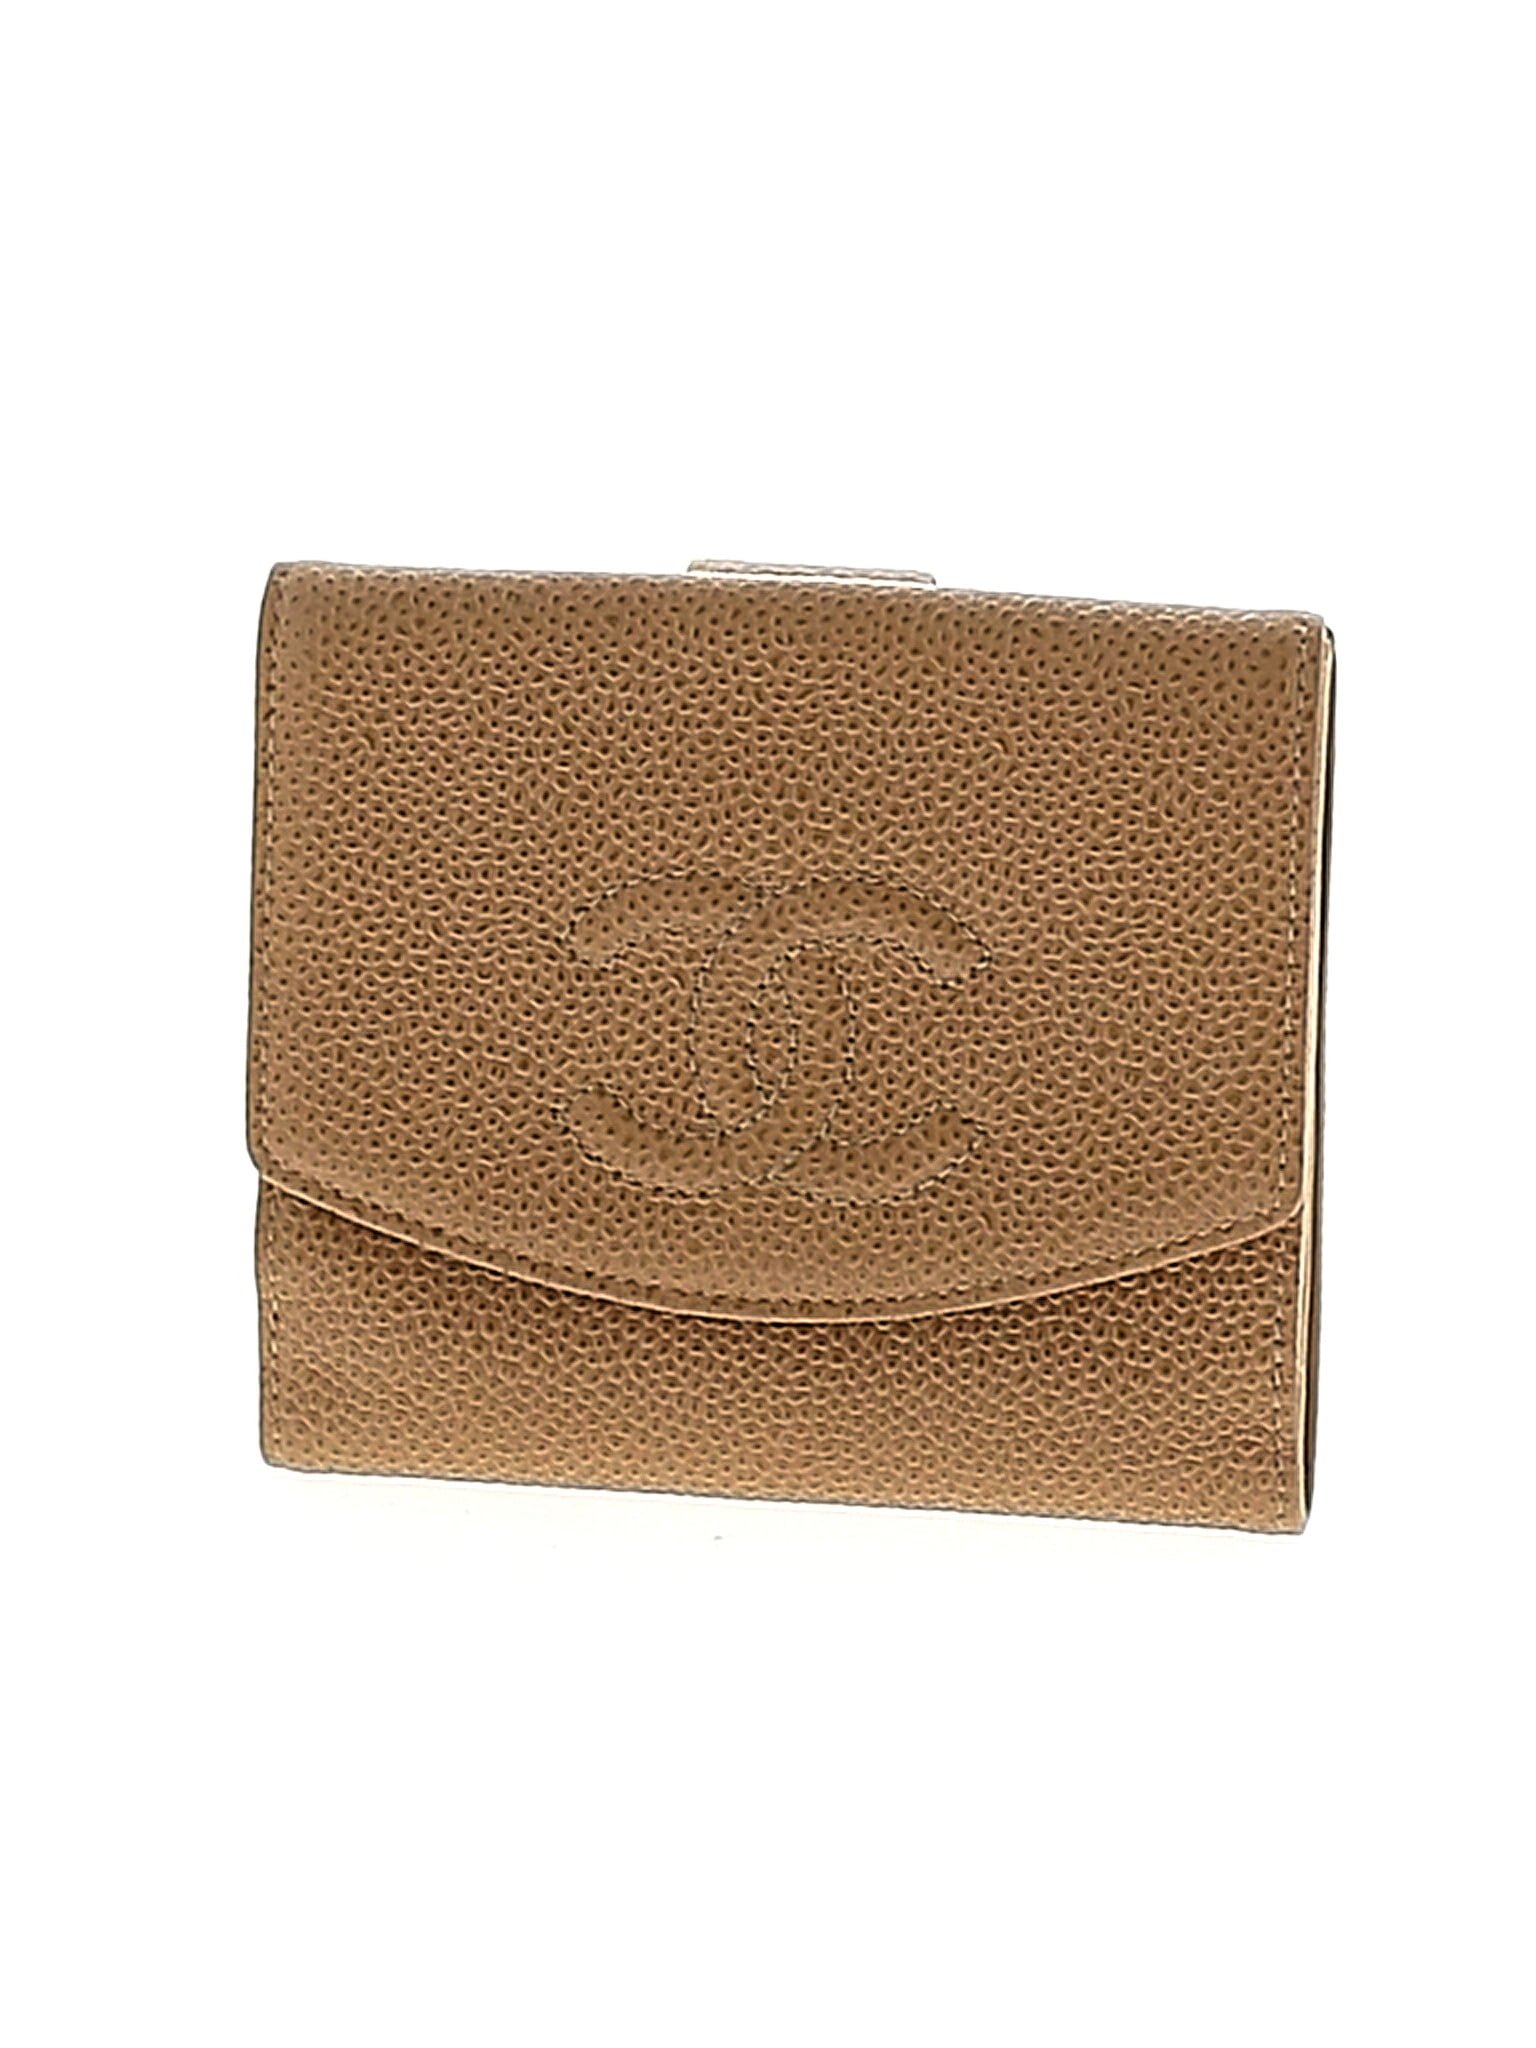 Chanel 100% Calf Leather Solid Tan Vintage Leather Timeless